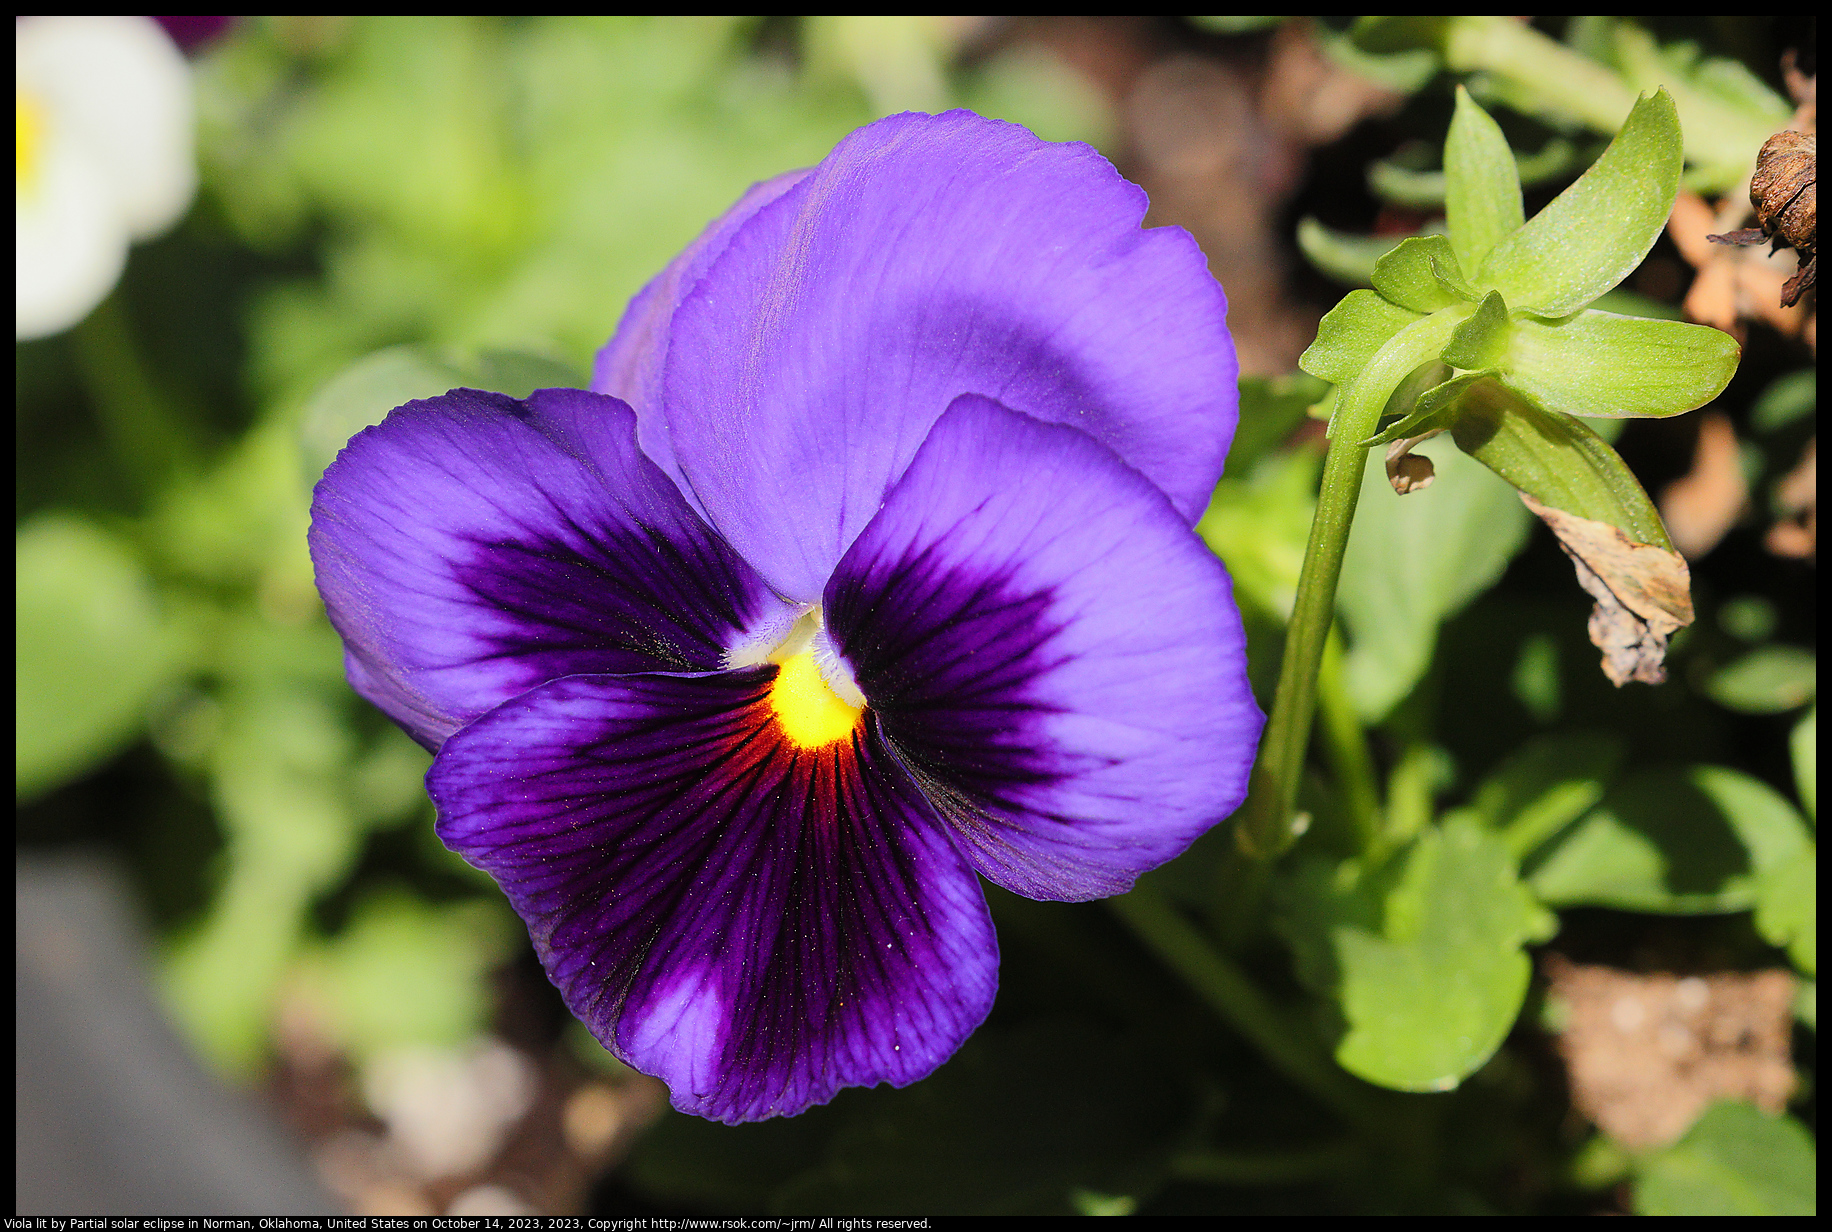 Viola lit by Partial solar eclipse in Norman, Oklahoma, United States on October 14, 2023